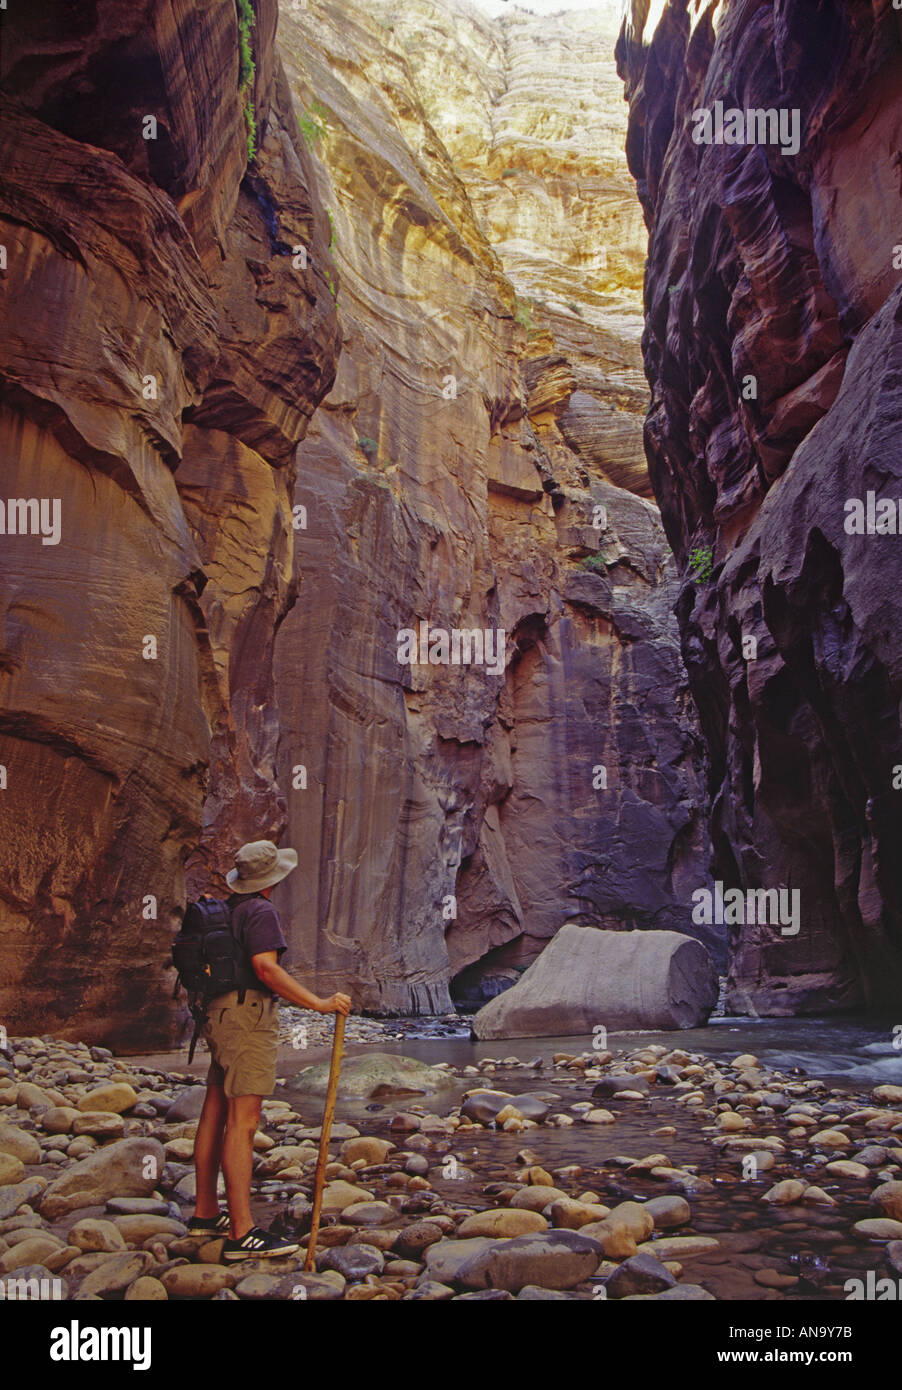 Hiker in The Narrows, Virgin River, Zion Canyon, Zion National Park, Utah, USA Stock Photo